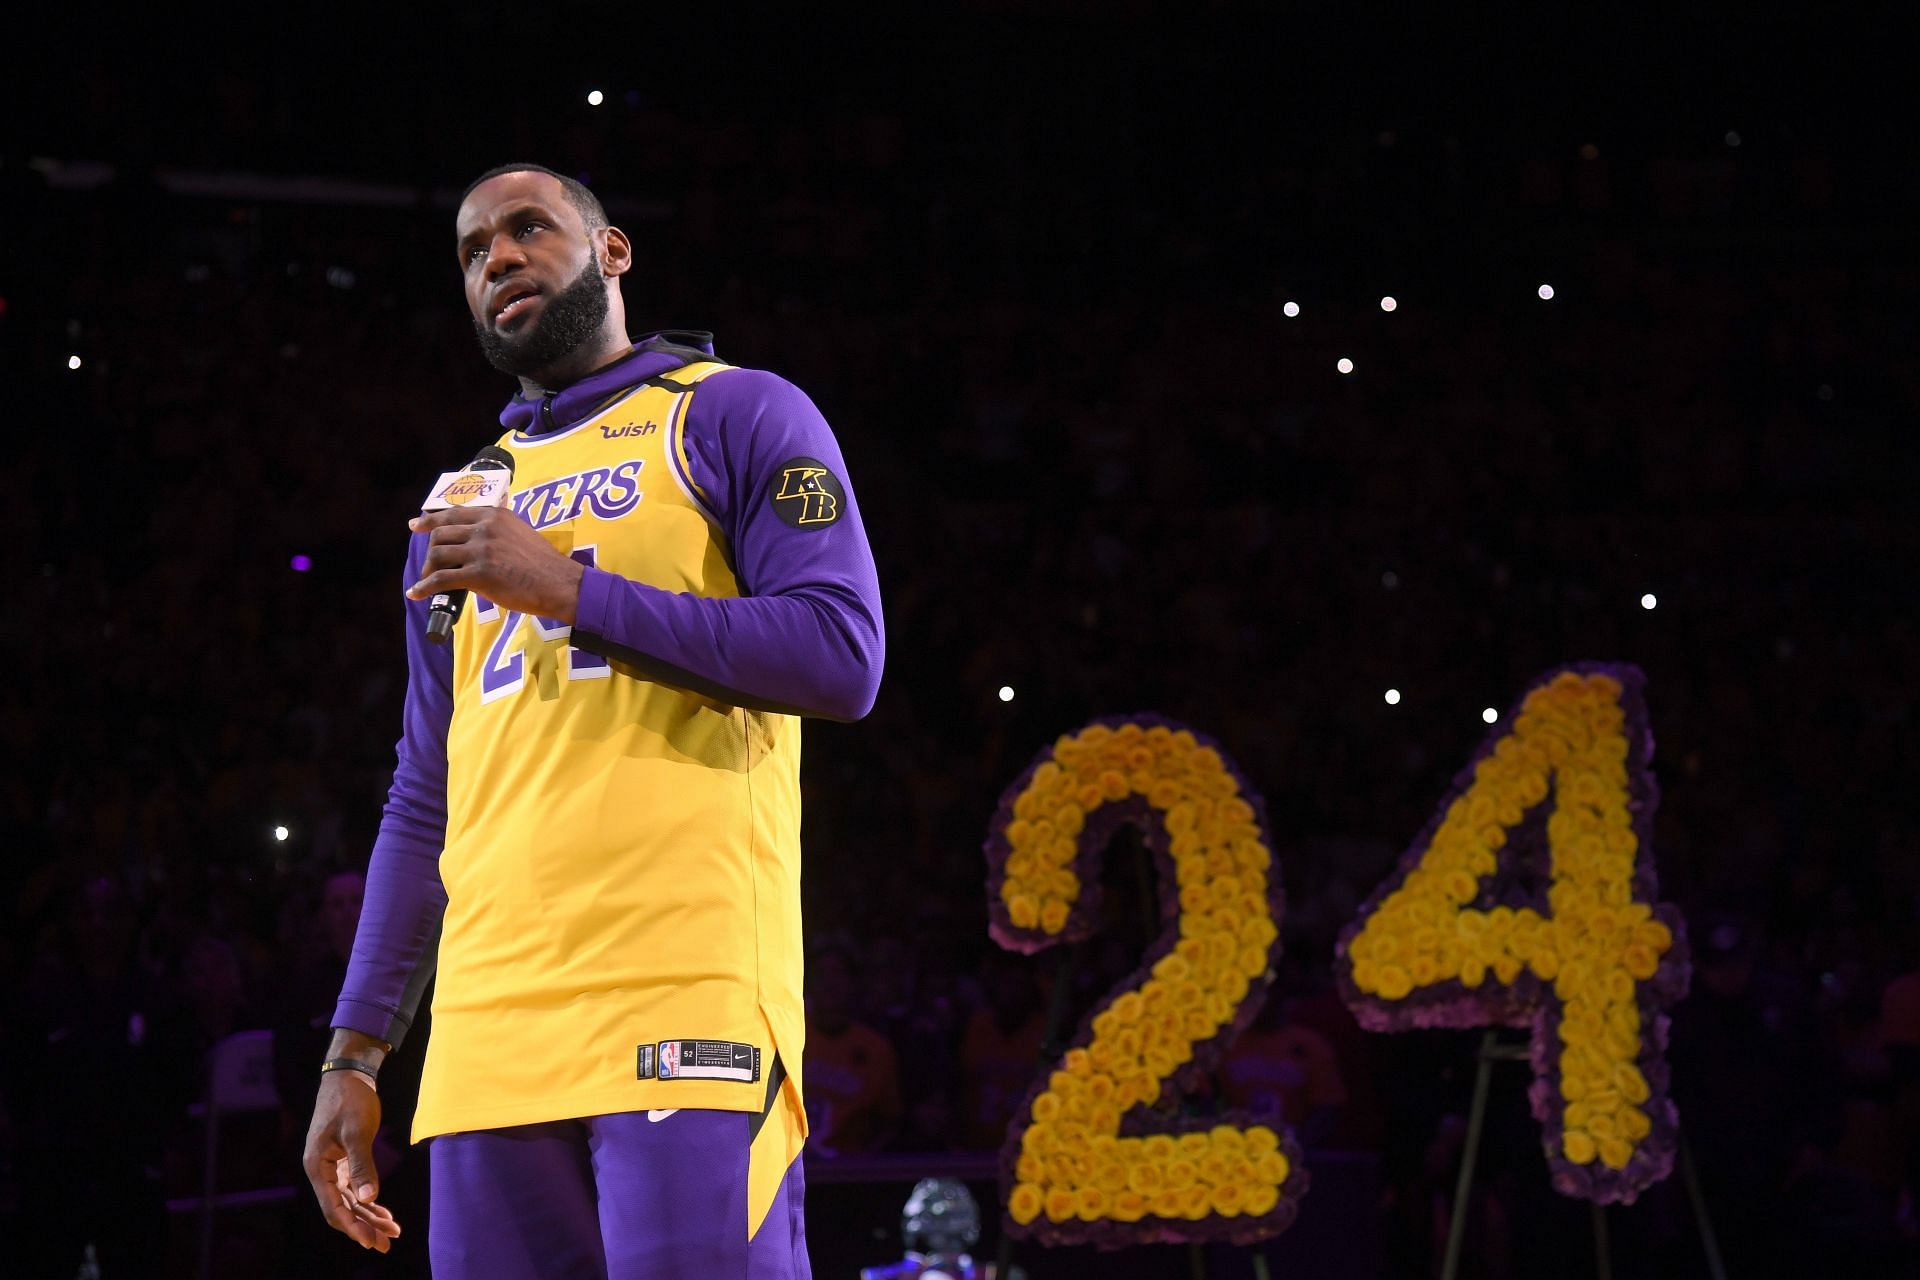 LeBron James and the Los Angeles Lakers will face the Brooklyn Nets on Christmas Day